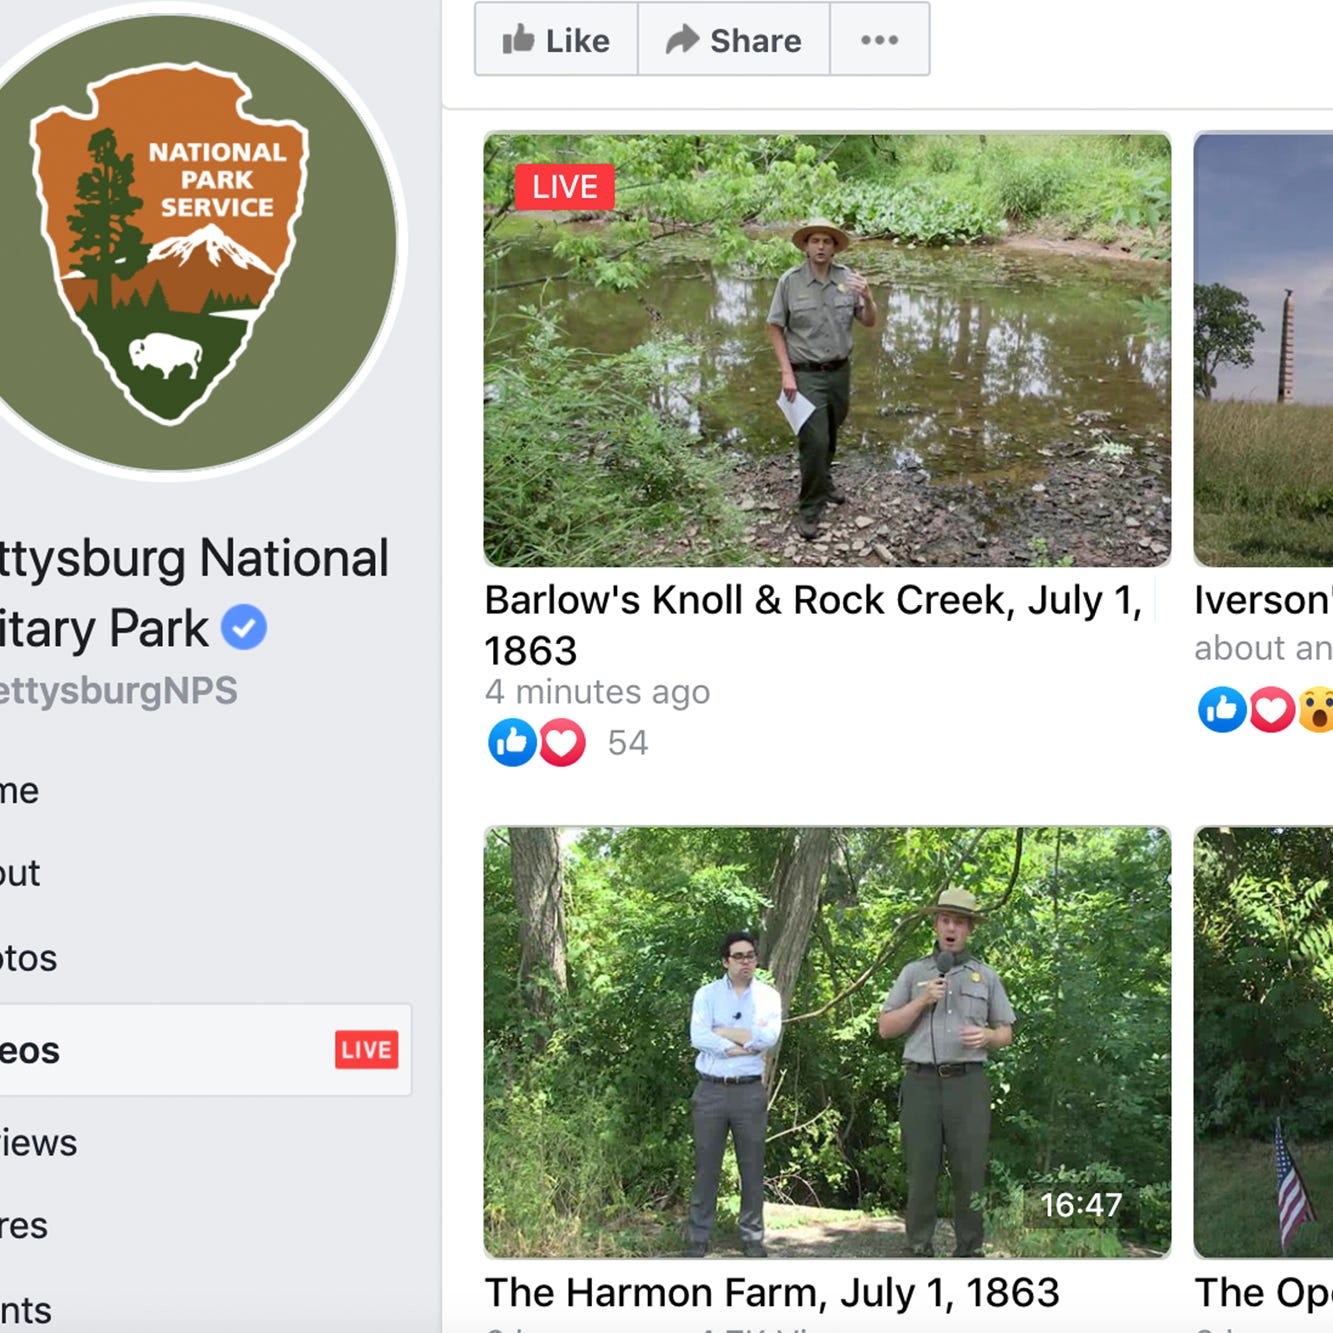 The Gettysburg National Military Park began premiering videos on their Facebook page covering events from the Battle of Gettysburg.